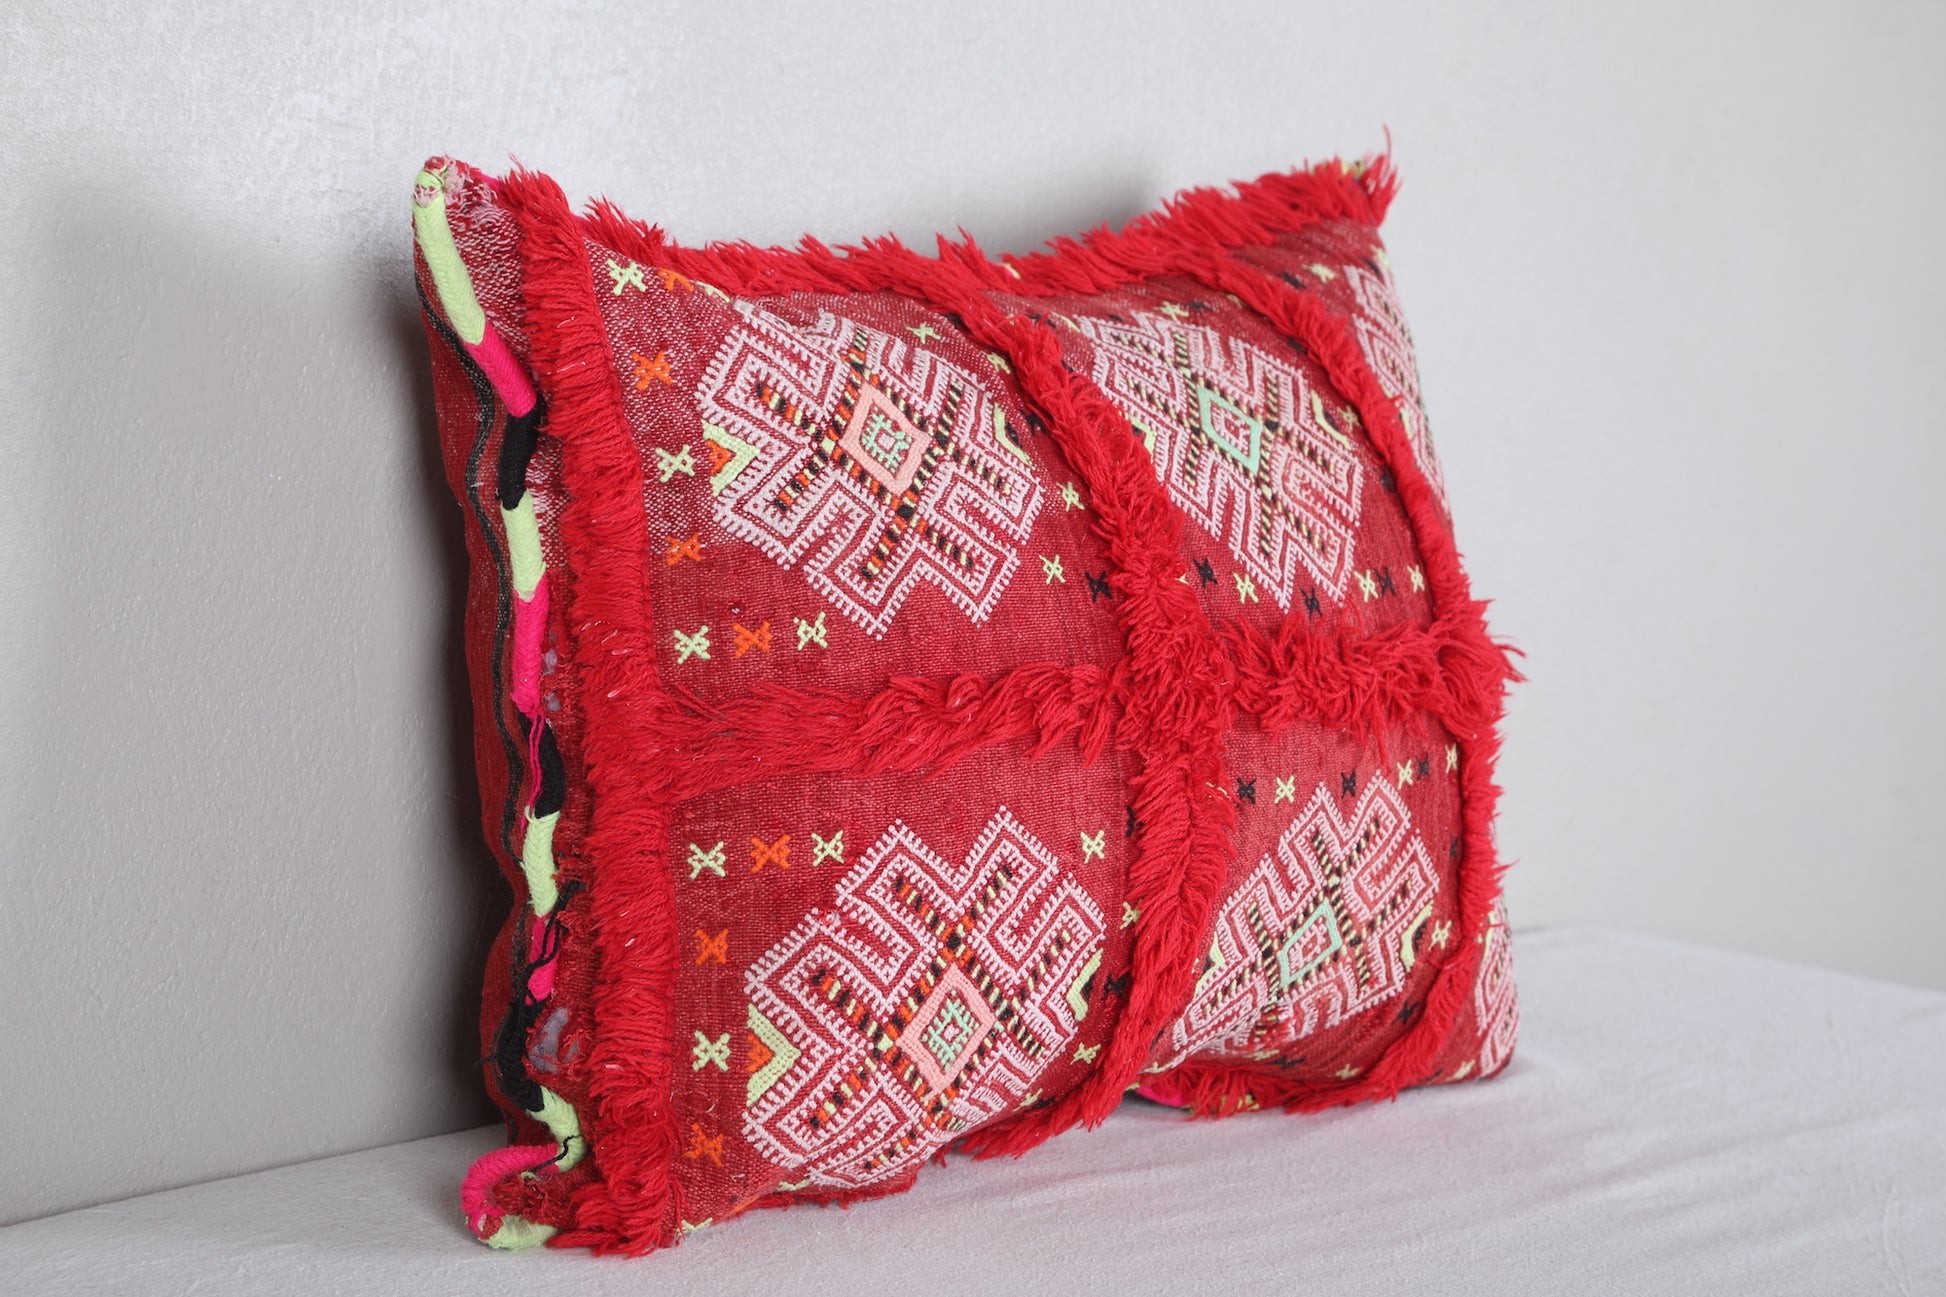 Red Moroccan Kilim Pillow 16.9 INCHES X 20.8 INCHES